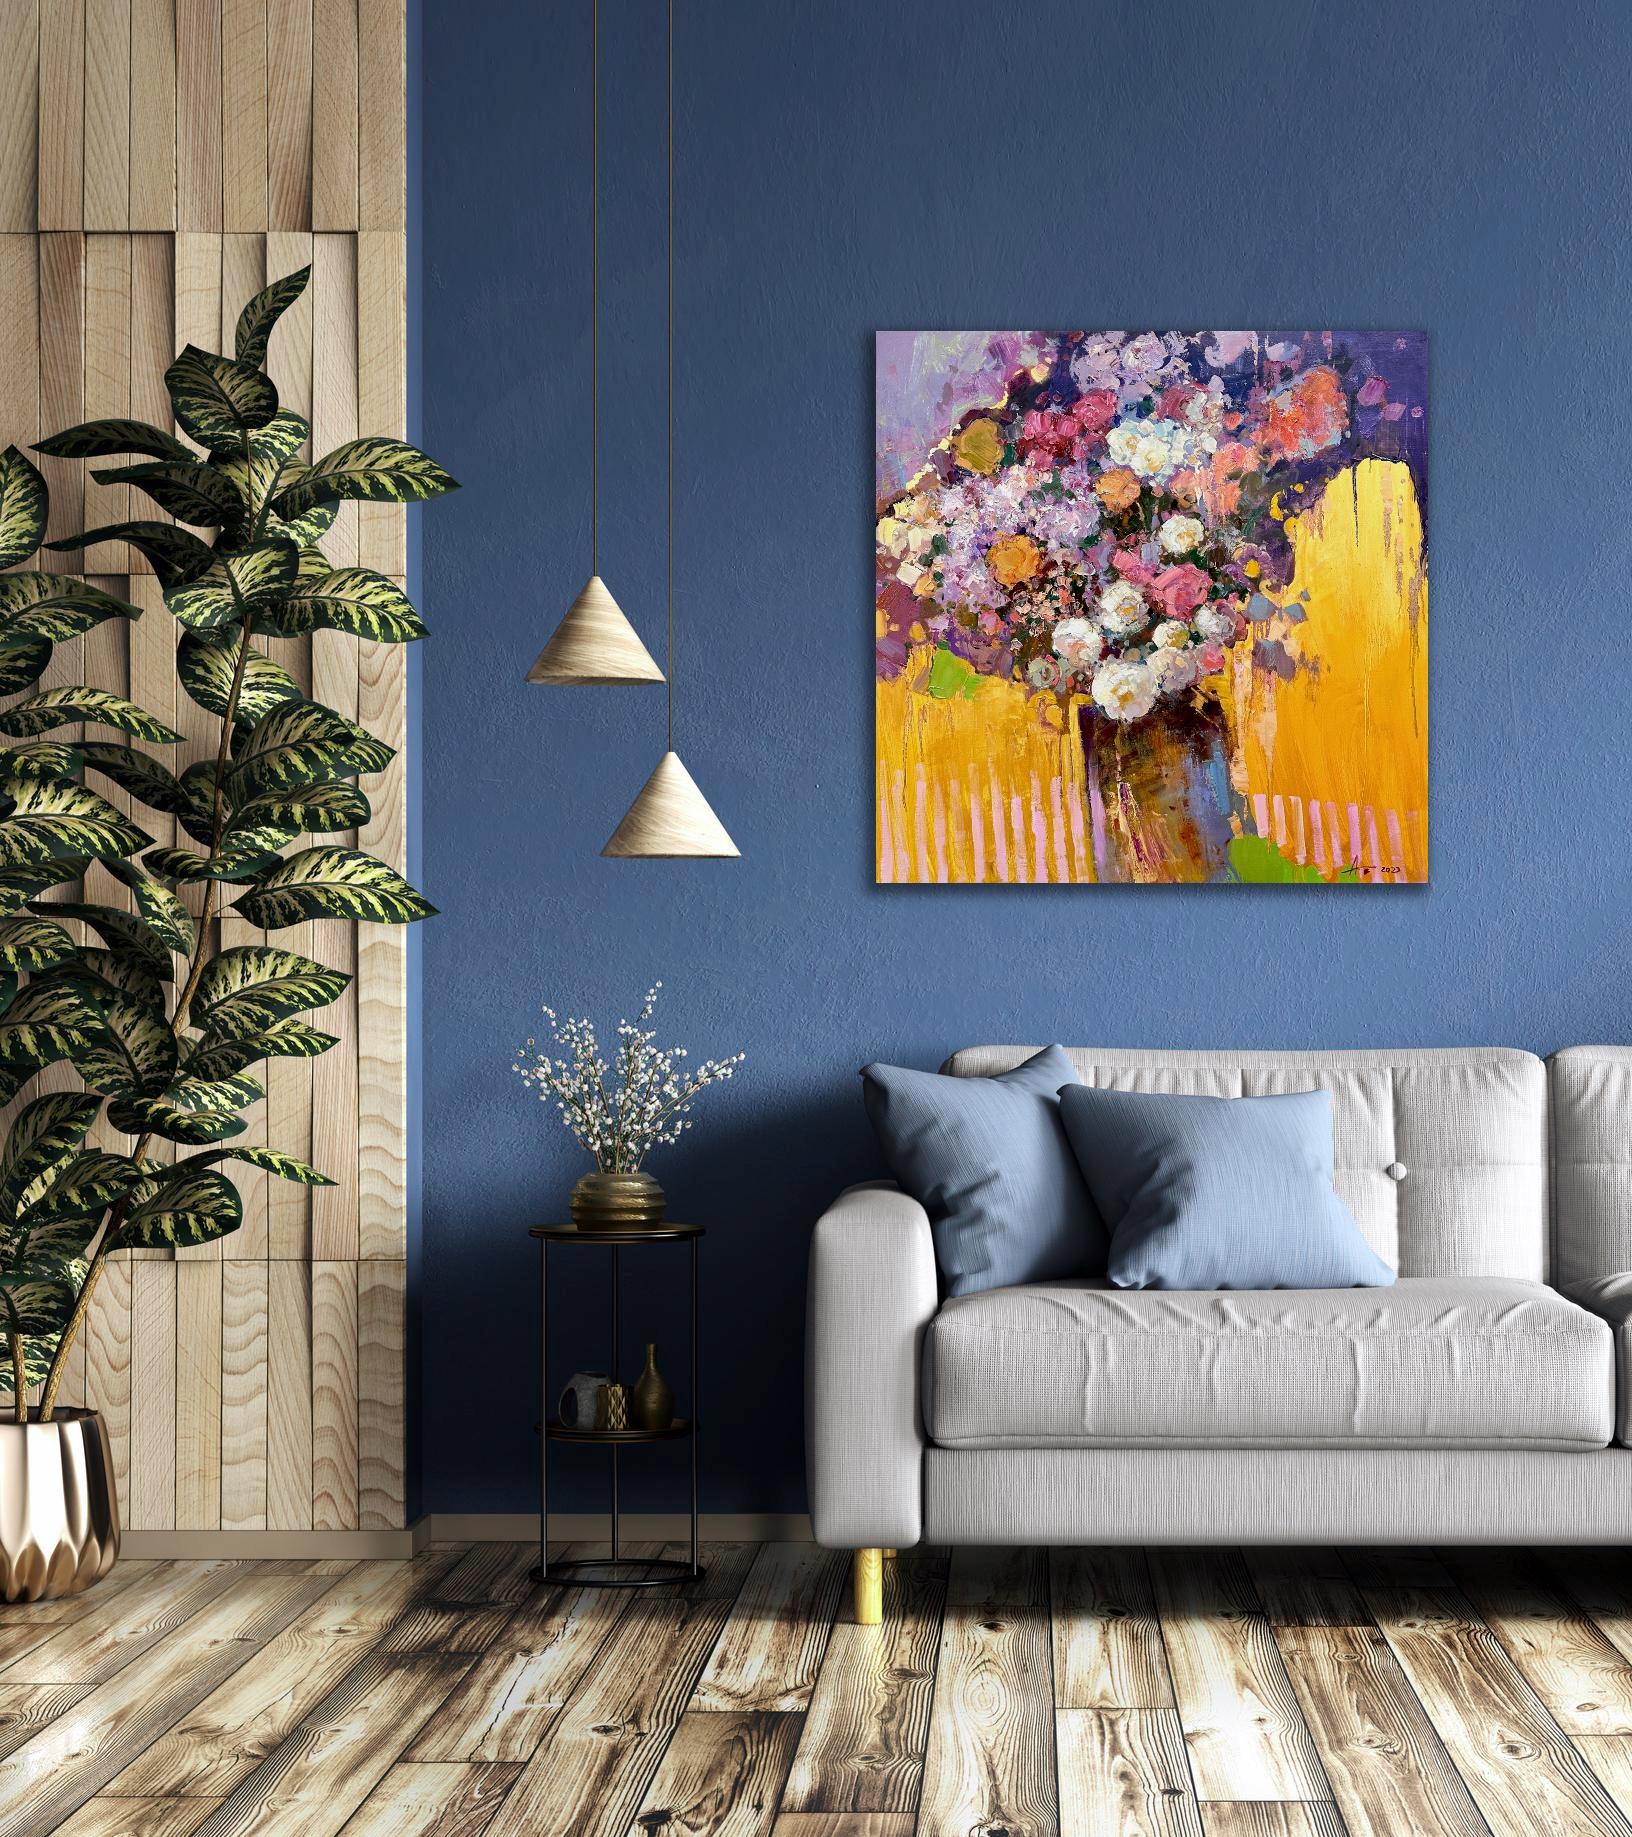 Bouquet on gold Original Oil Painting with Flowers by Andrei Belaichuk For Sale 5